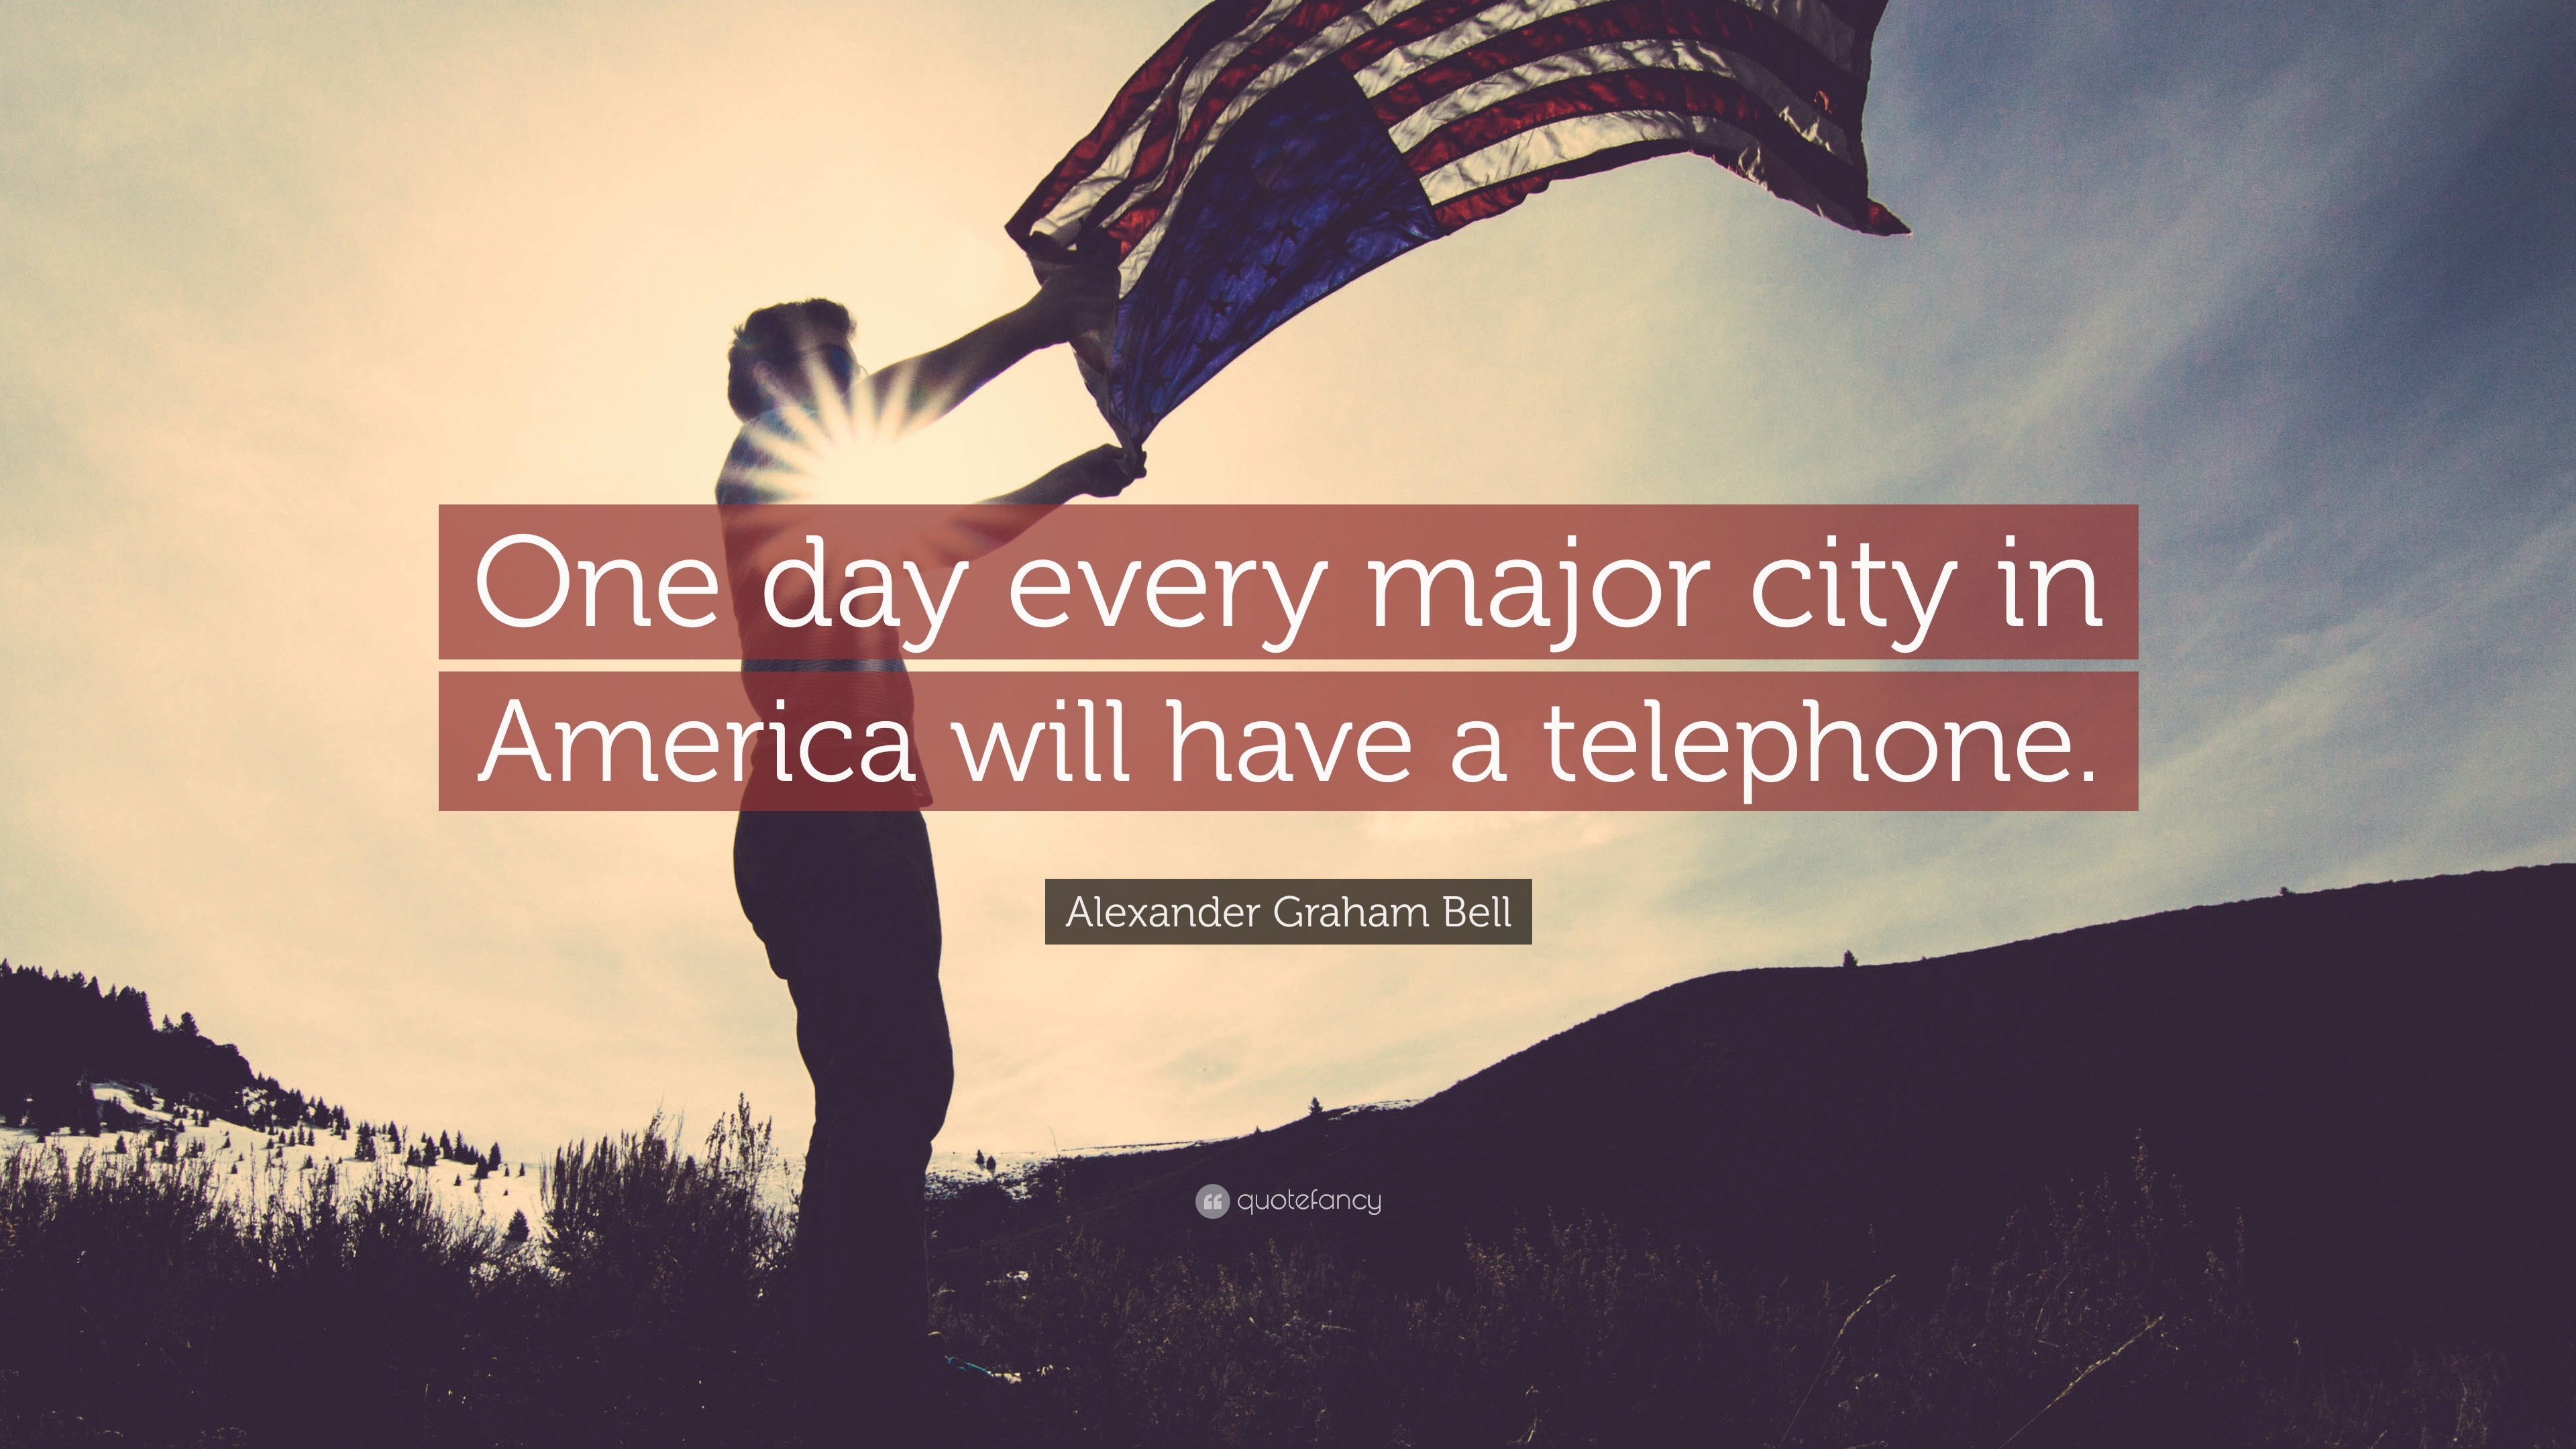 Alexander Graham Bell Quote One Day Every Major City In America Will Have A Telephone 11 Wallpapers Quotefancy